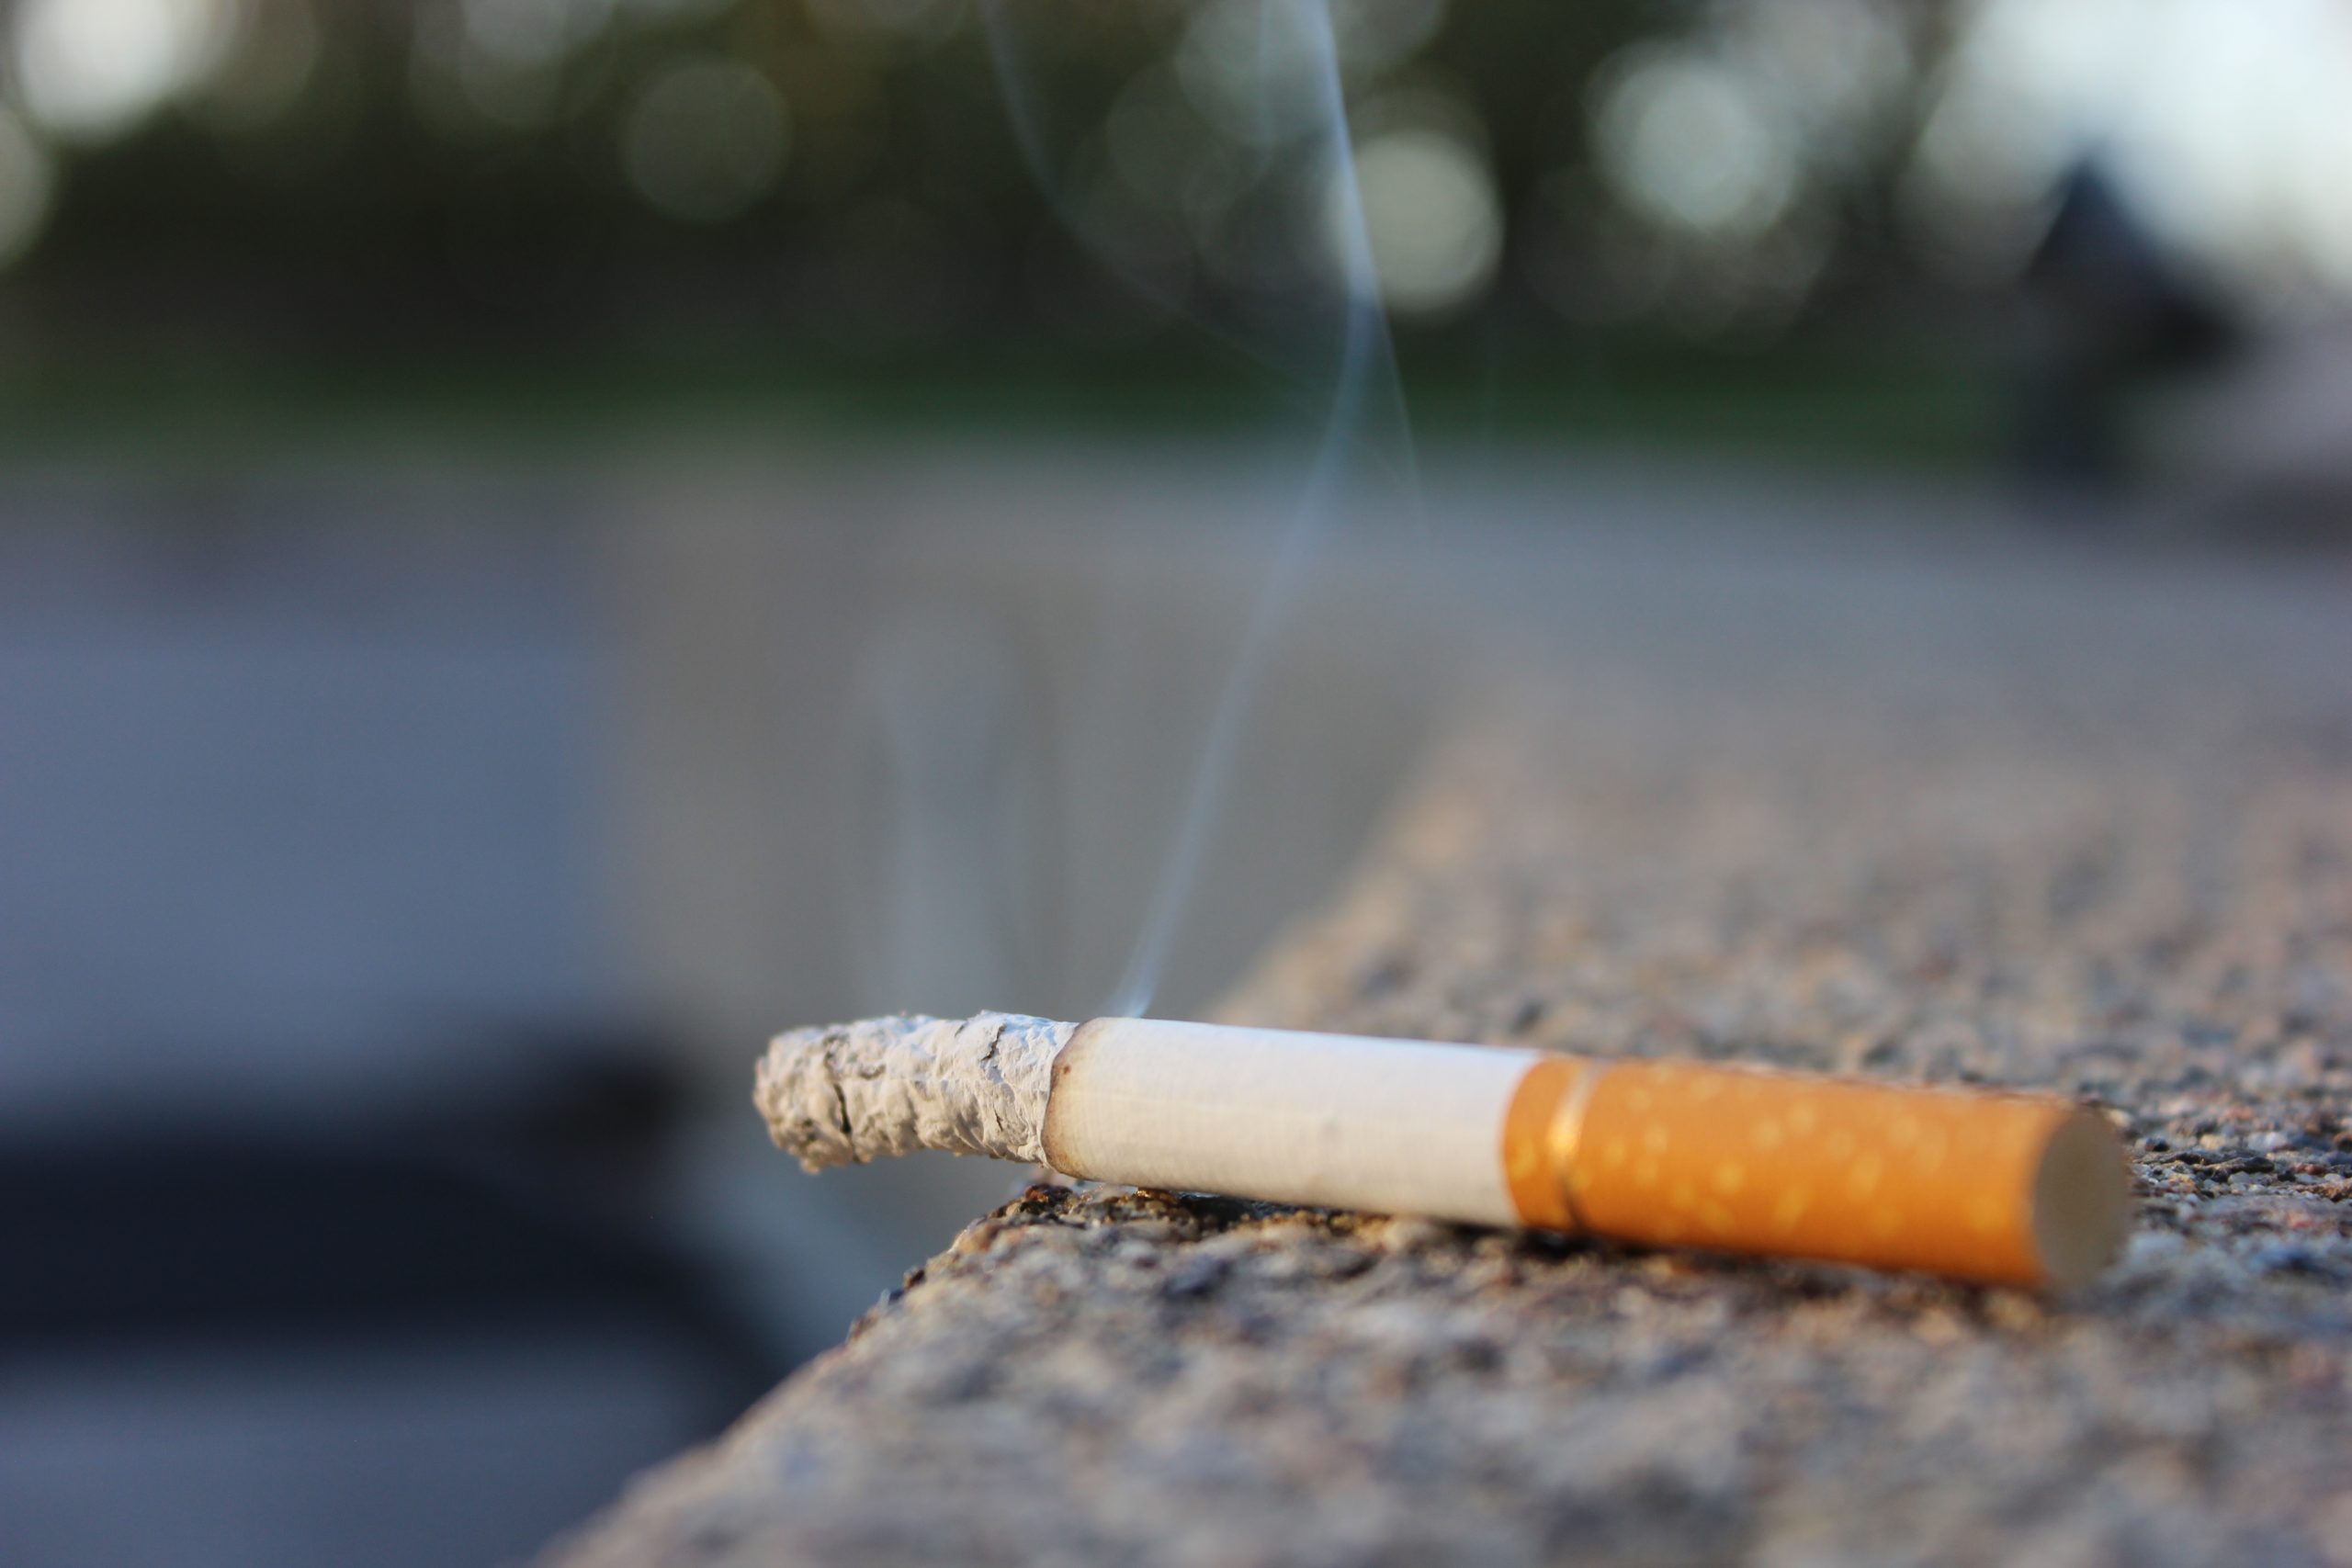 Many Americans still smoke but the culture's drastically changed